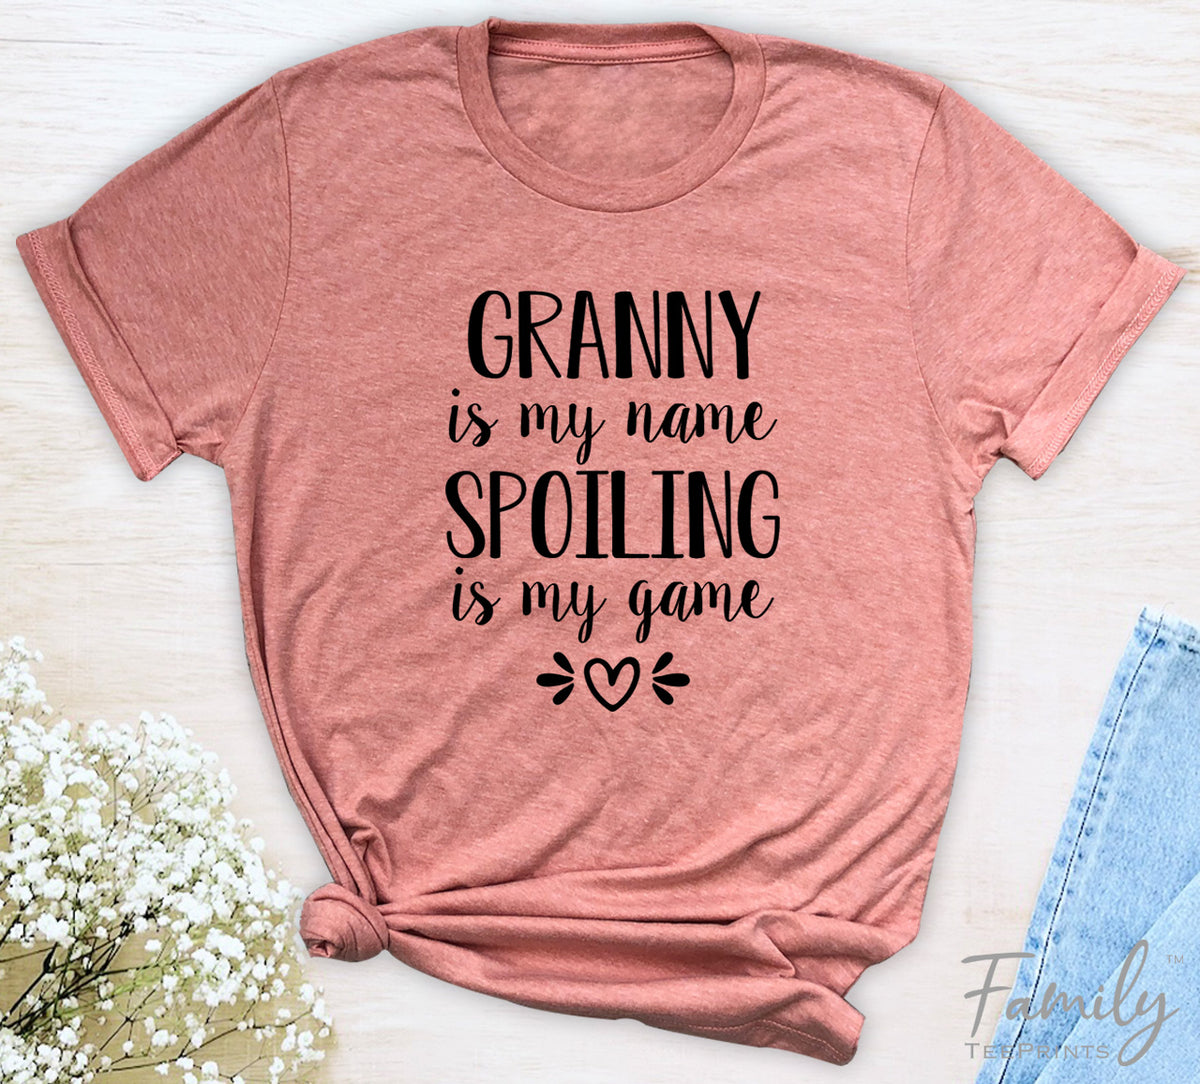 Granny Is My Name Spoiling Is My Game - Unisex T-shirt - Granny Shirt - Gift For Granny - familyteeprints